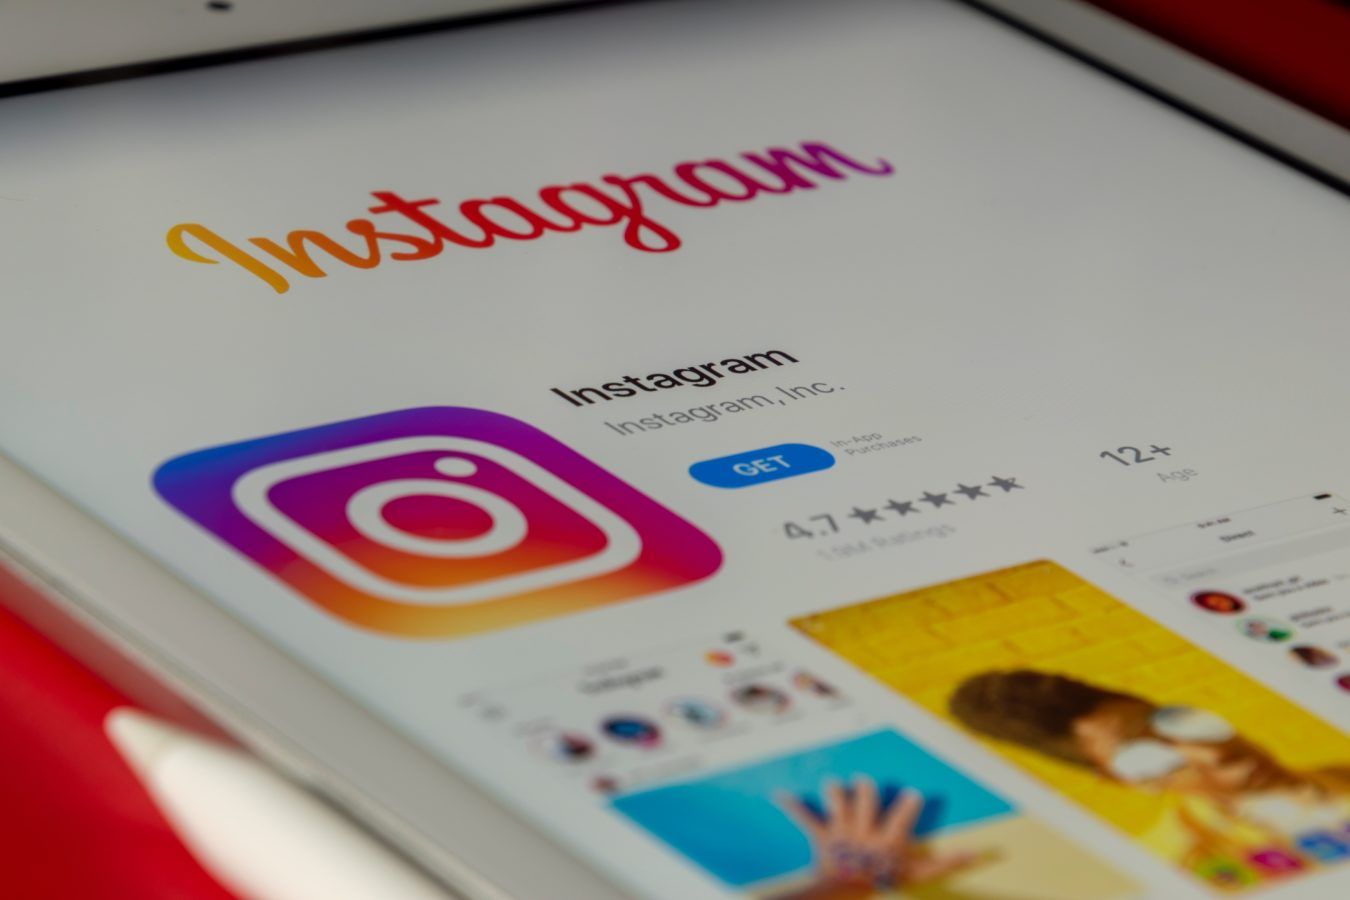 Discover how you can post directly from the web version of Instagram soon